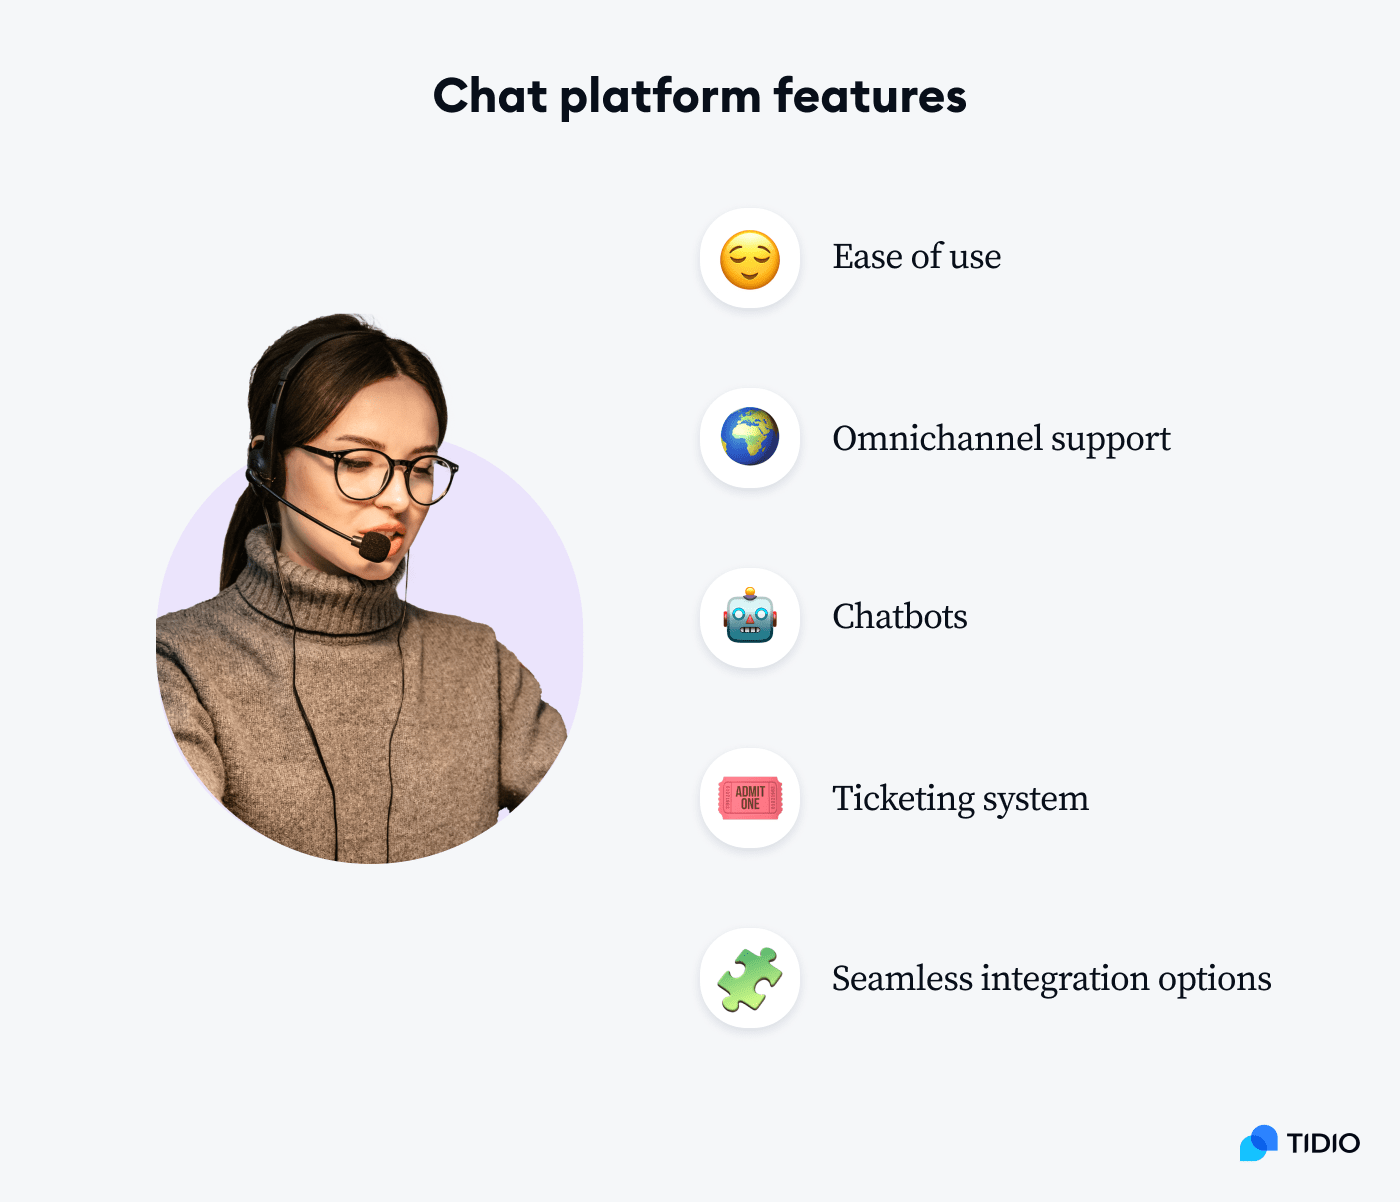 chat platform features on image